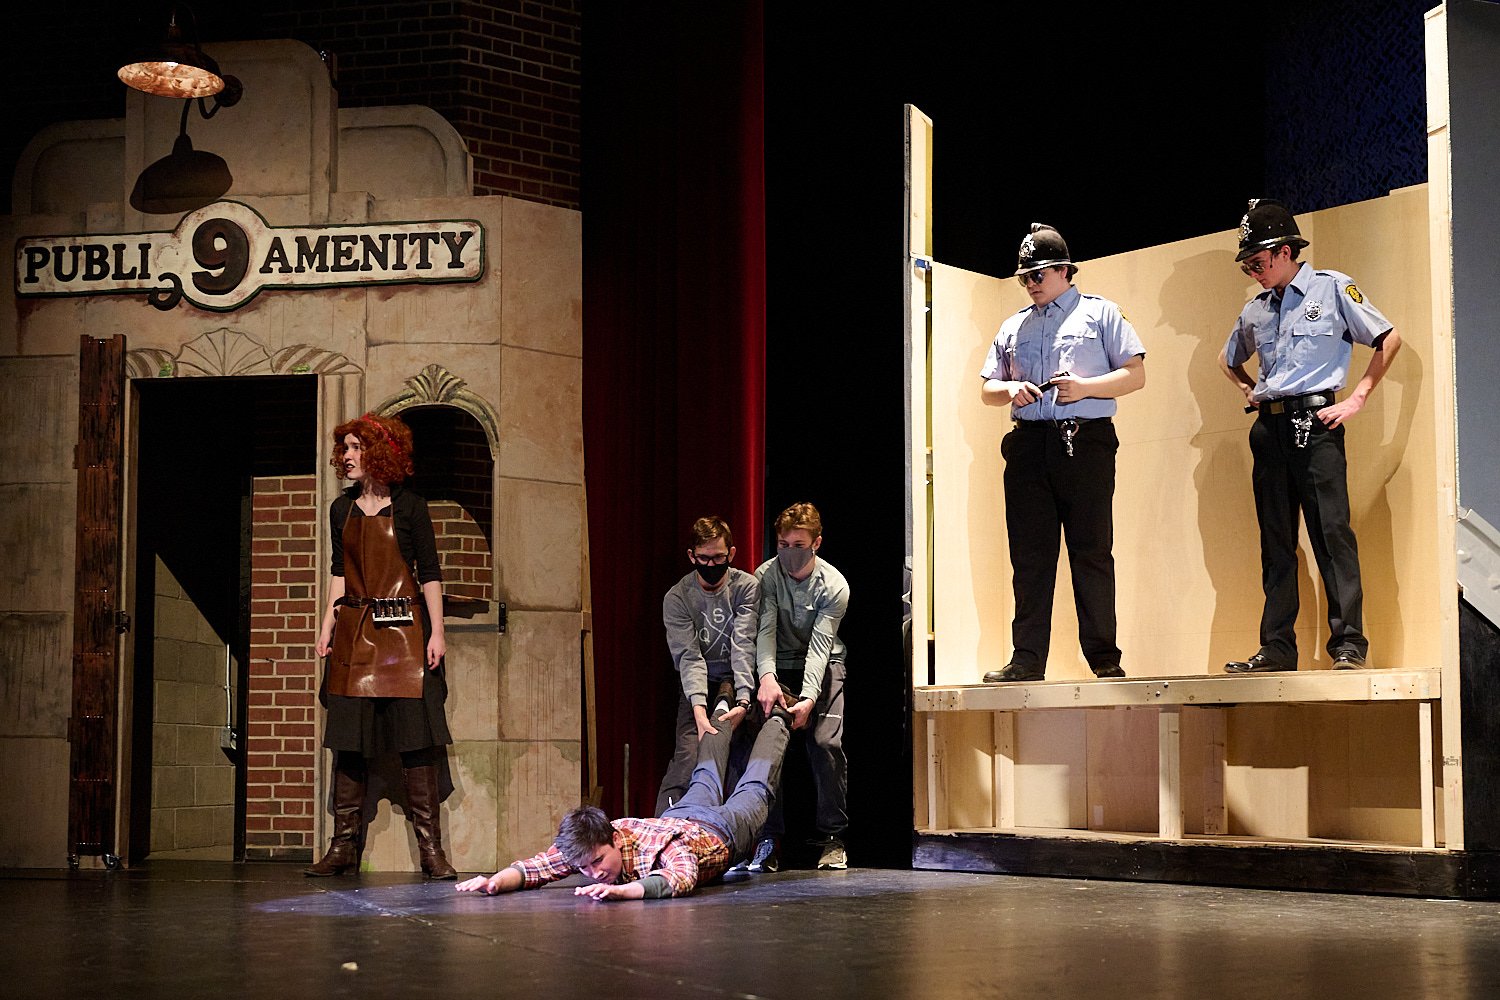  SEWICKLEY, PA, USA - MARCH 2ND 2022: High School students of Sewickley Academy are performing in an annual musical show “Urinetown” running on March 3rd-5th 2022. tech crew 